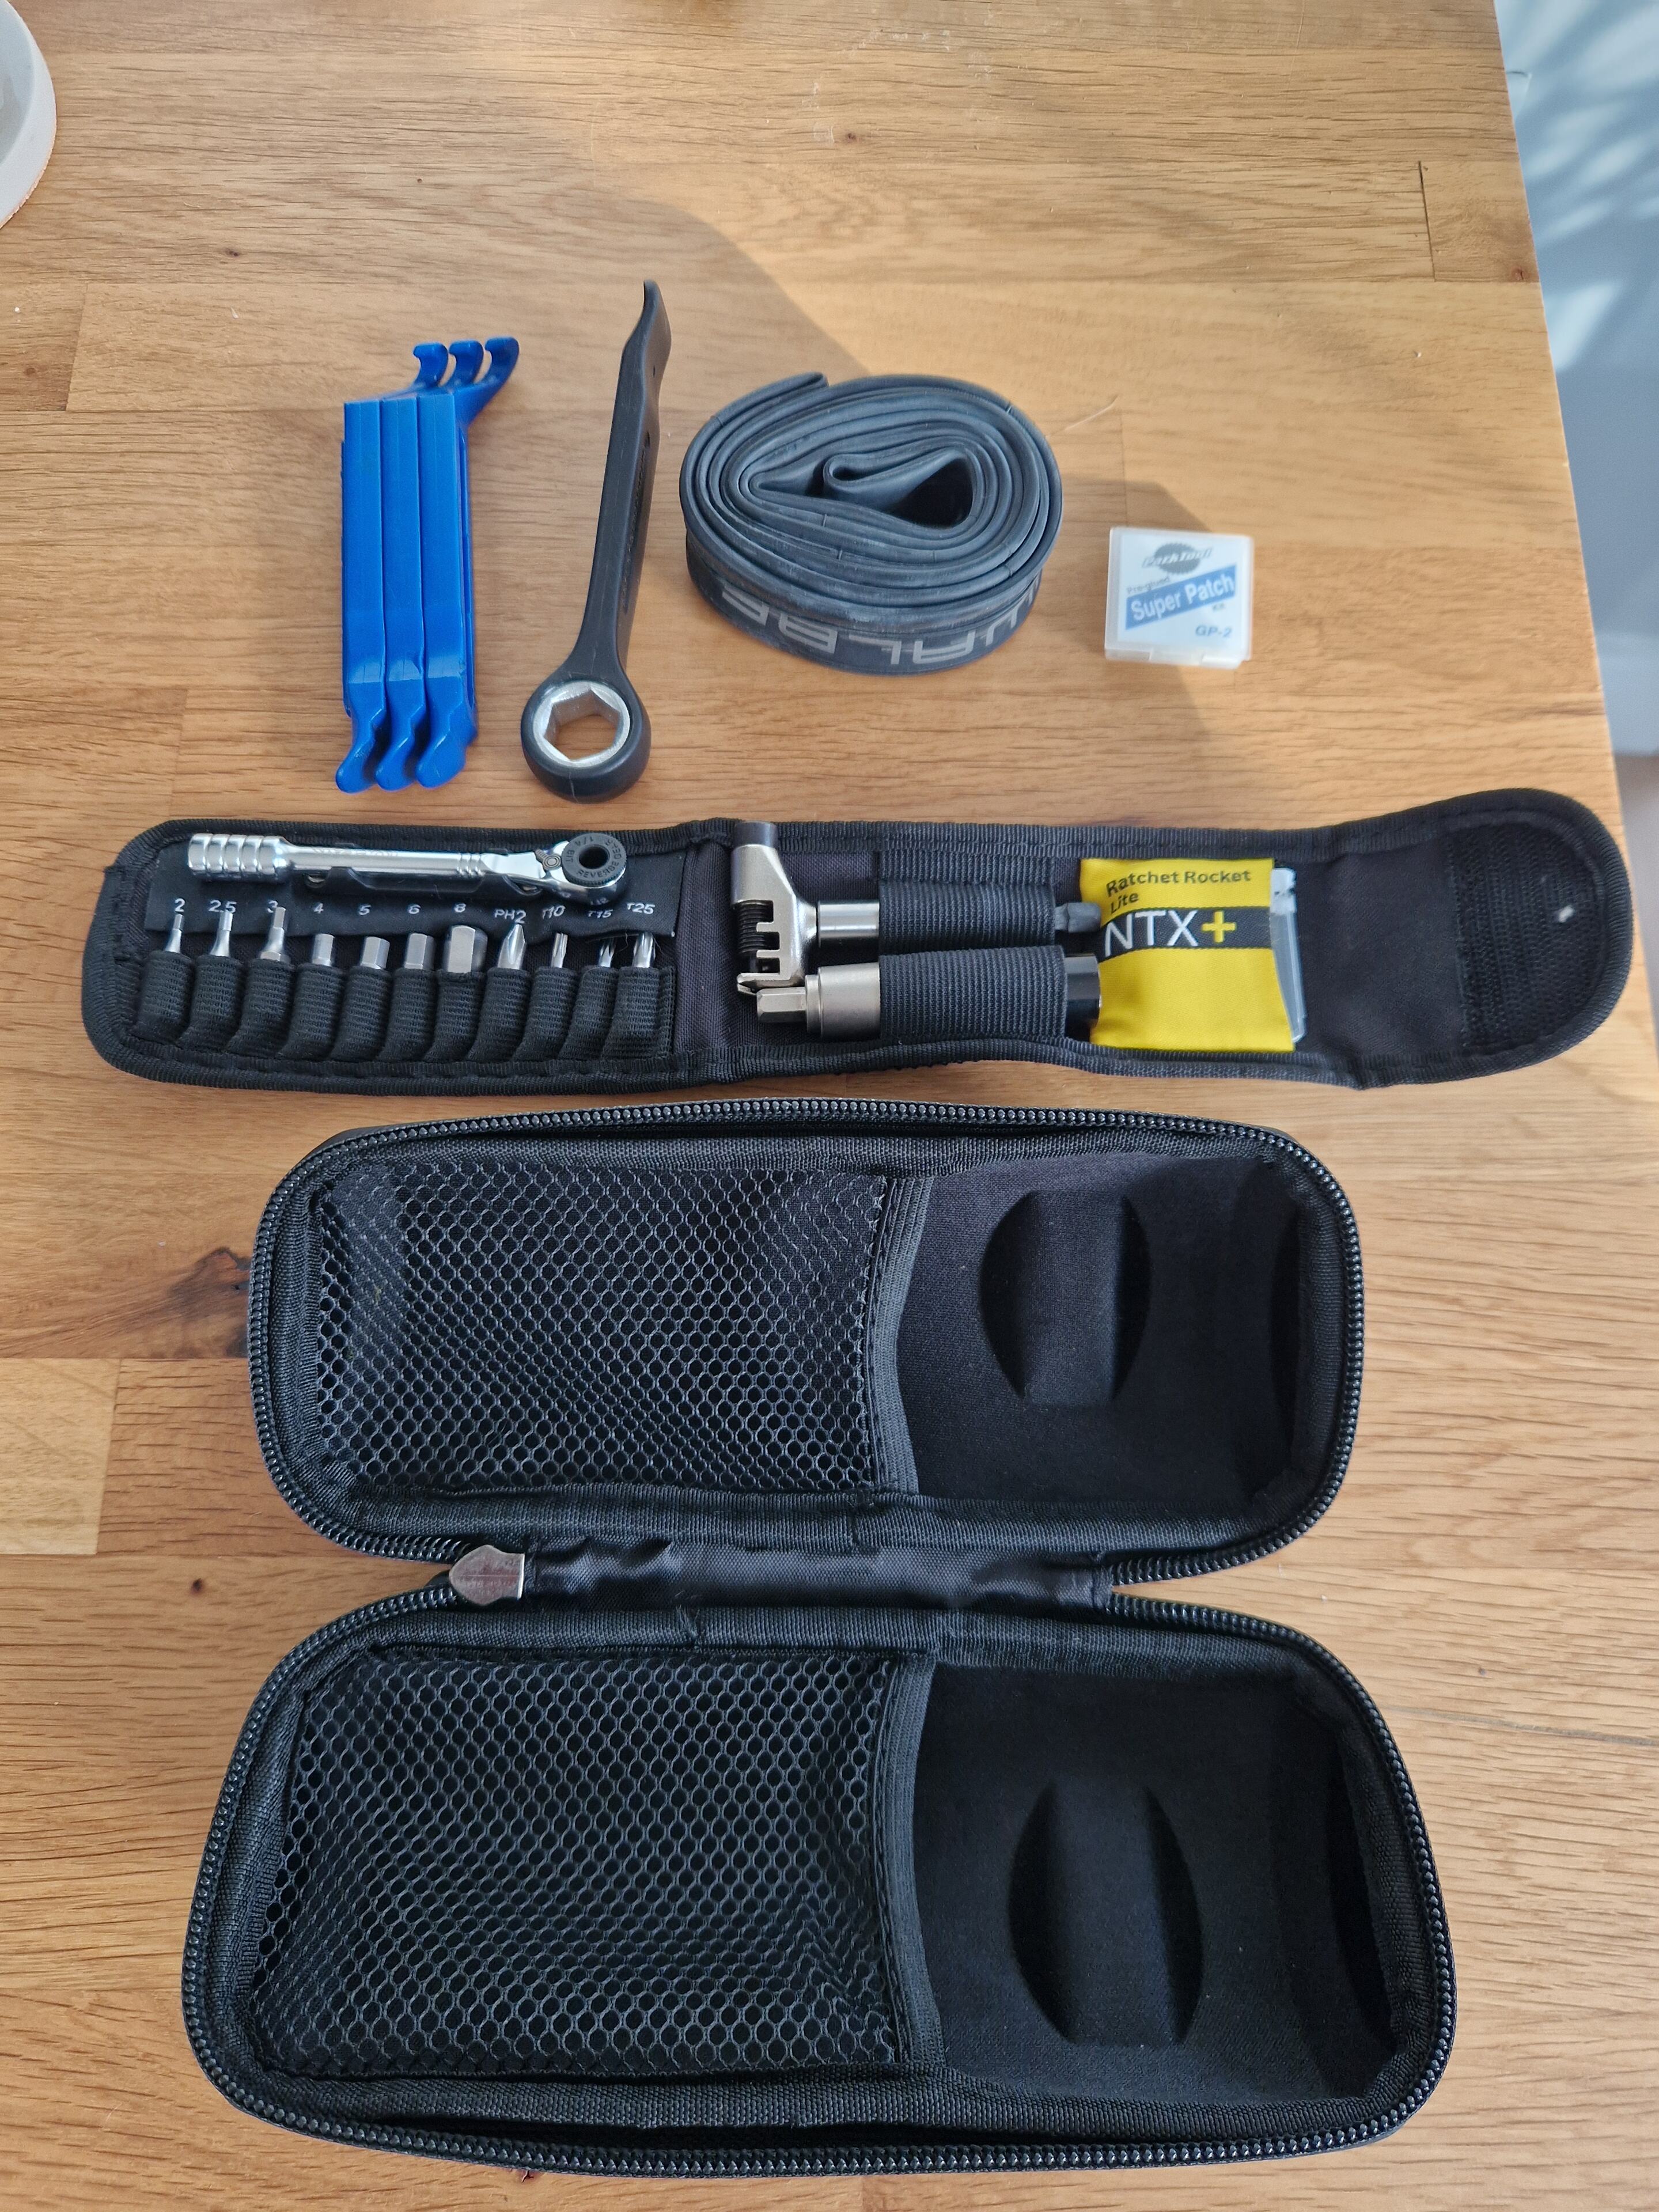 Pistonheads - The image shows a small, black tool kit with an open lid displayed on a table. Inside the case, there are various tools including a screwdriver and a pair of pliers. To the right of the tool kit, there is a coil of wire, along with some additional tools which are partially obscured. The scene suggests that someone may be preparing to fix or work on something mechanical or electrical.